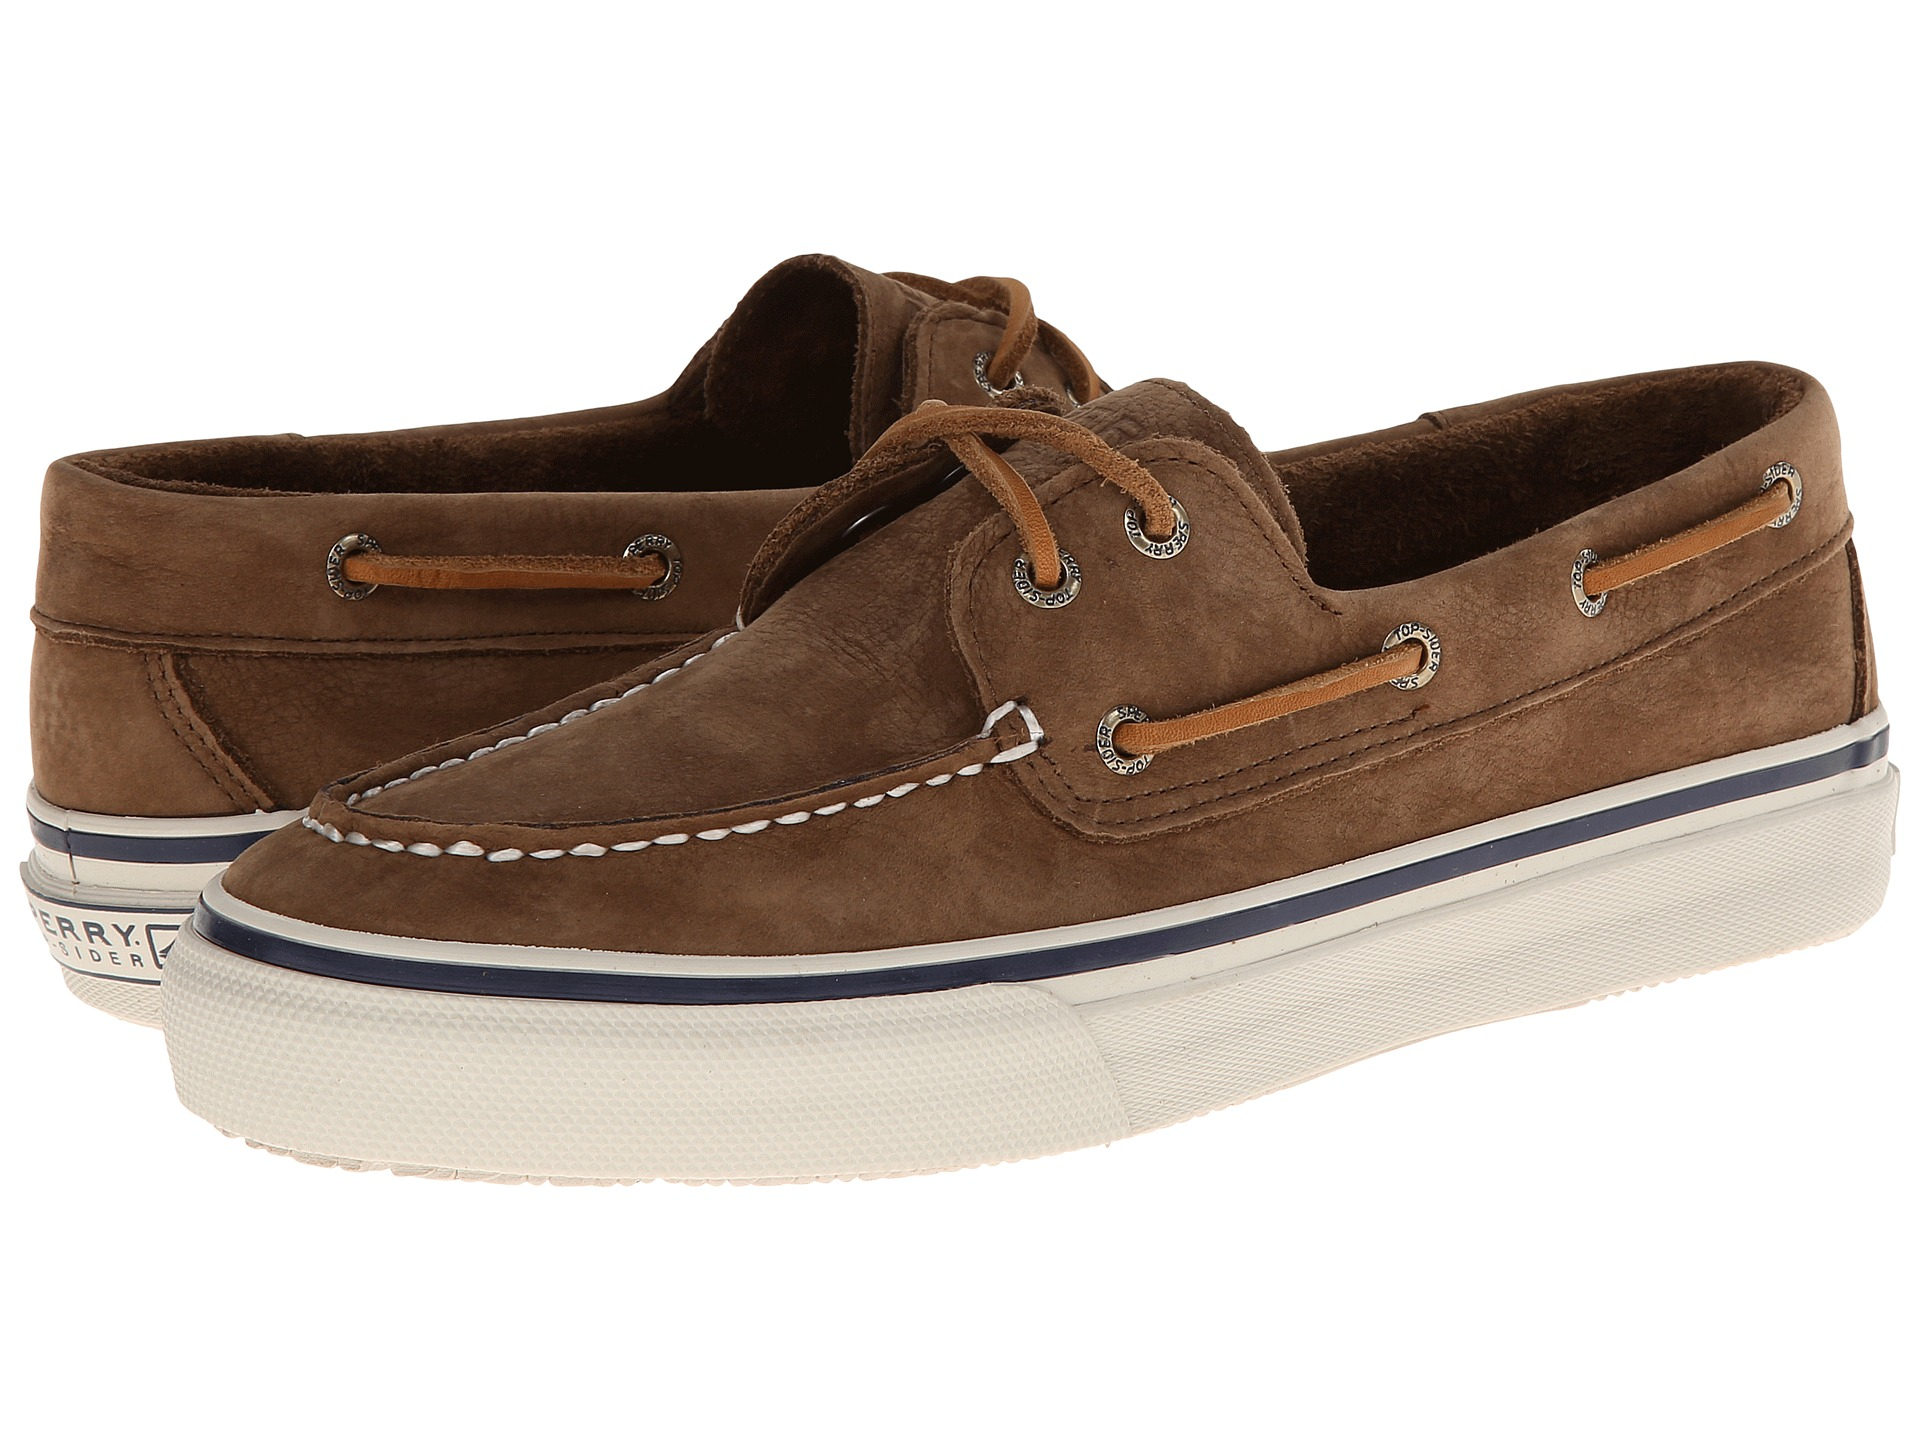 Sperry Top-Sider Bahama 2 Eye Washable in Brown for Men - Lyst